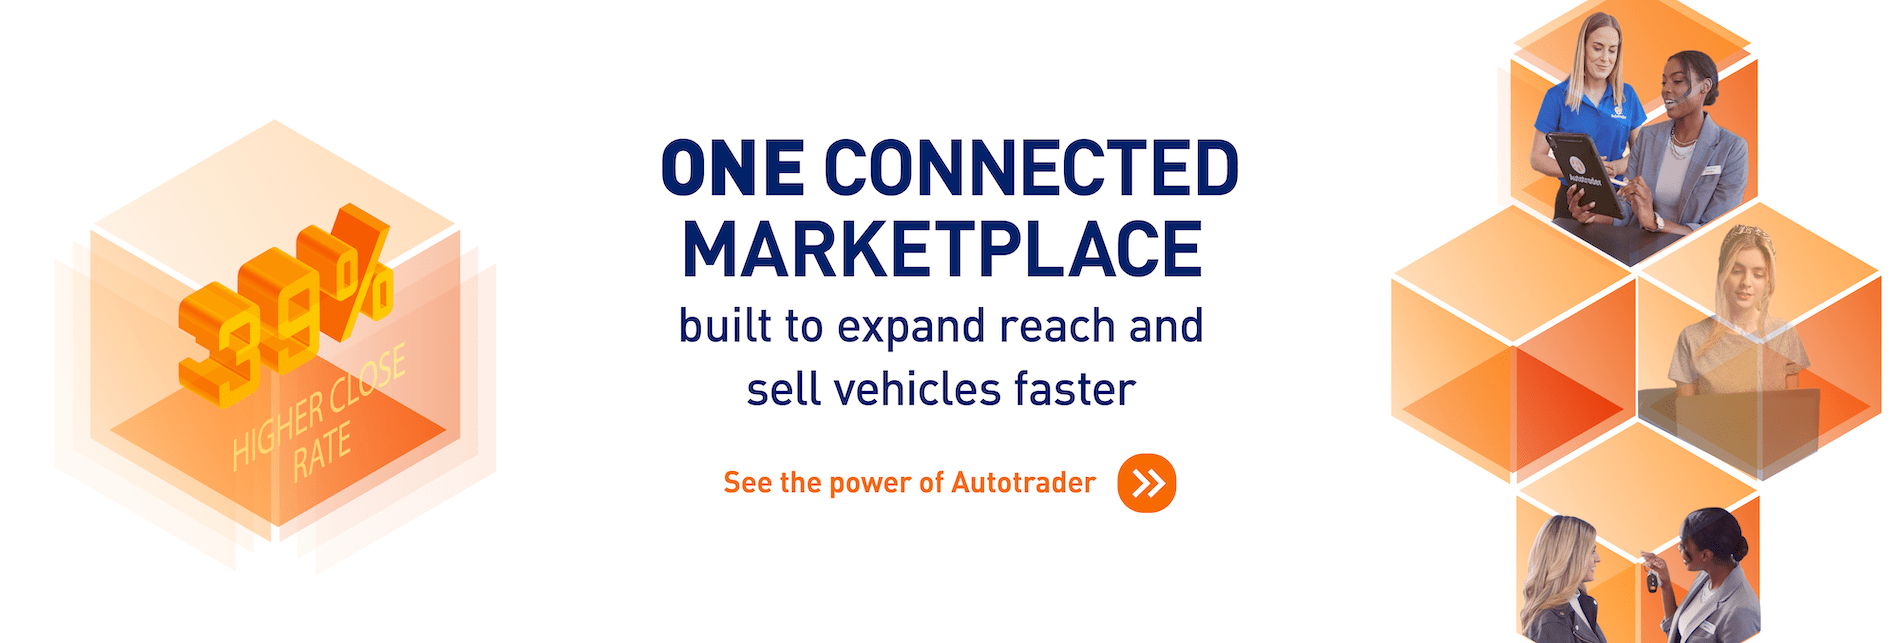 One Connected Marketplace built to expand reach and sell vehicles faster. Join us at NADA Show 2023